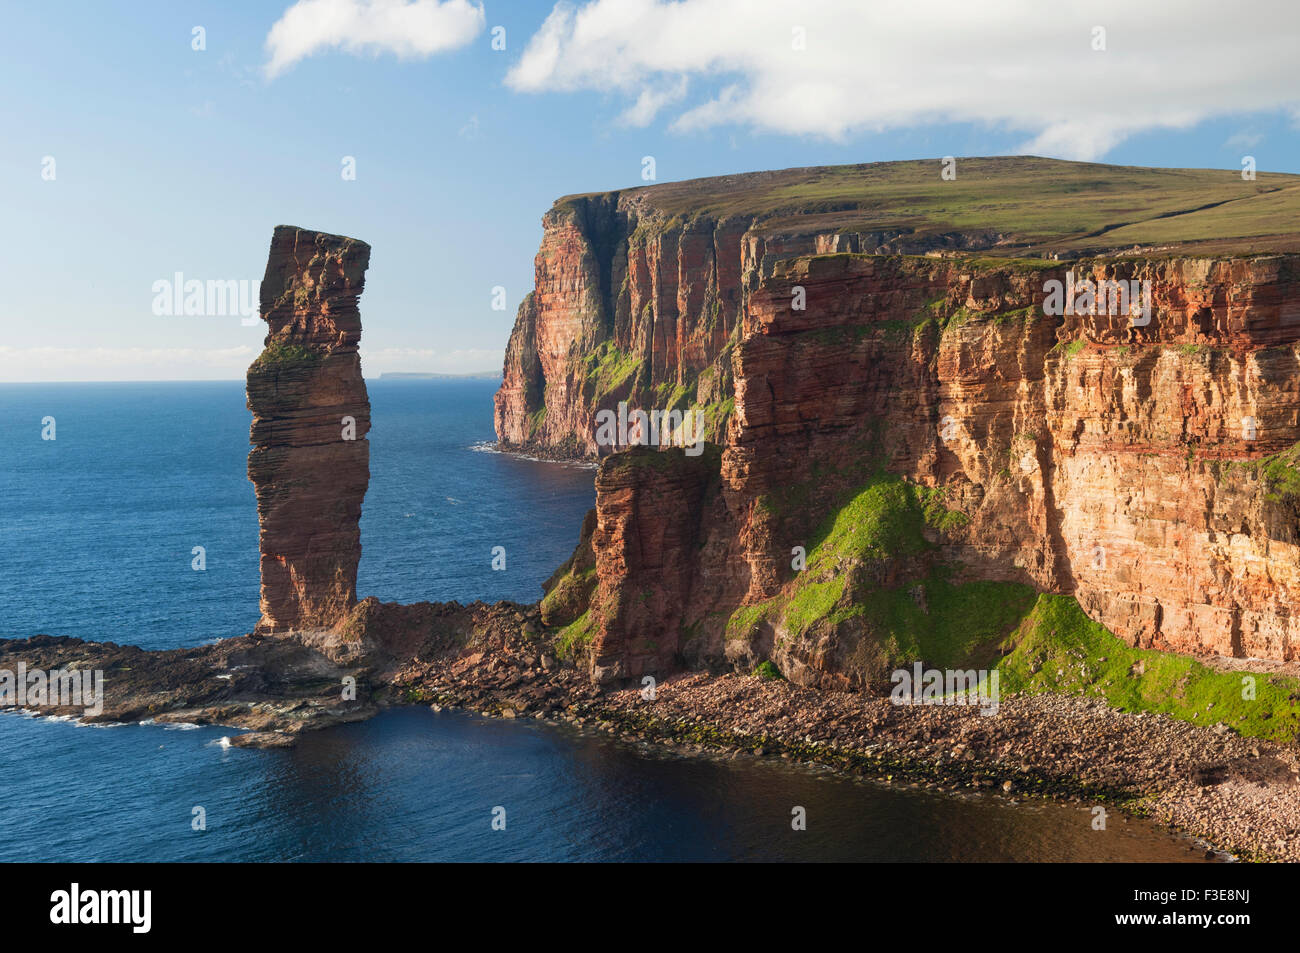 The Old Man of Hoy - famous sea stack on the island of Hoy, Orkney Islands, Scotland. Stock Photo